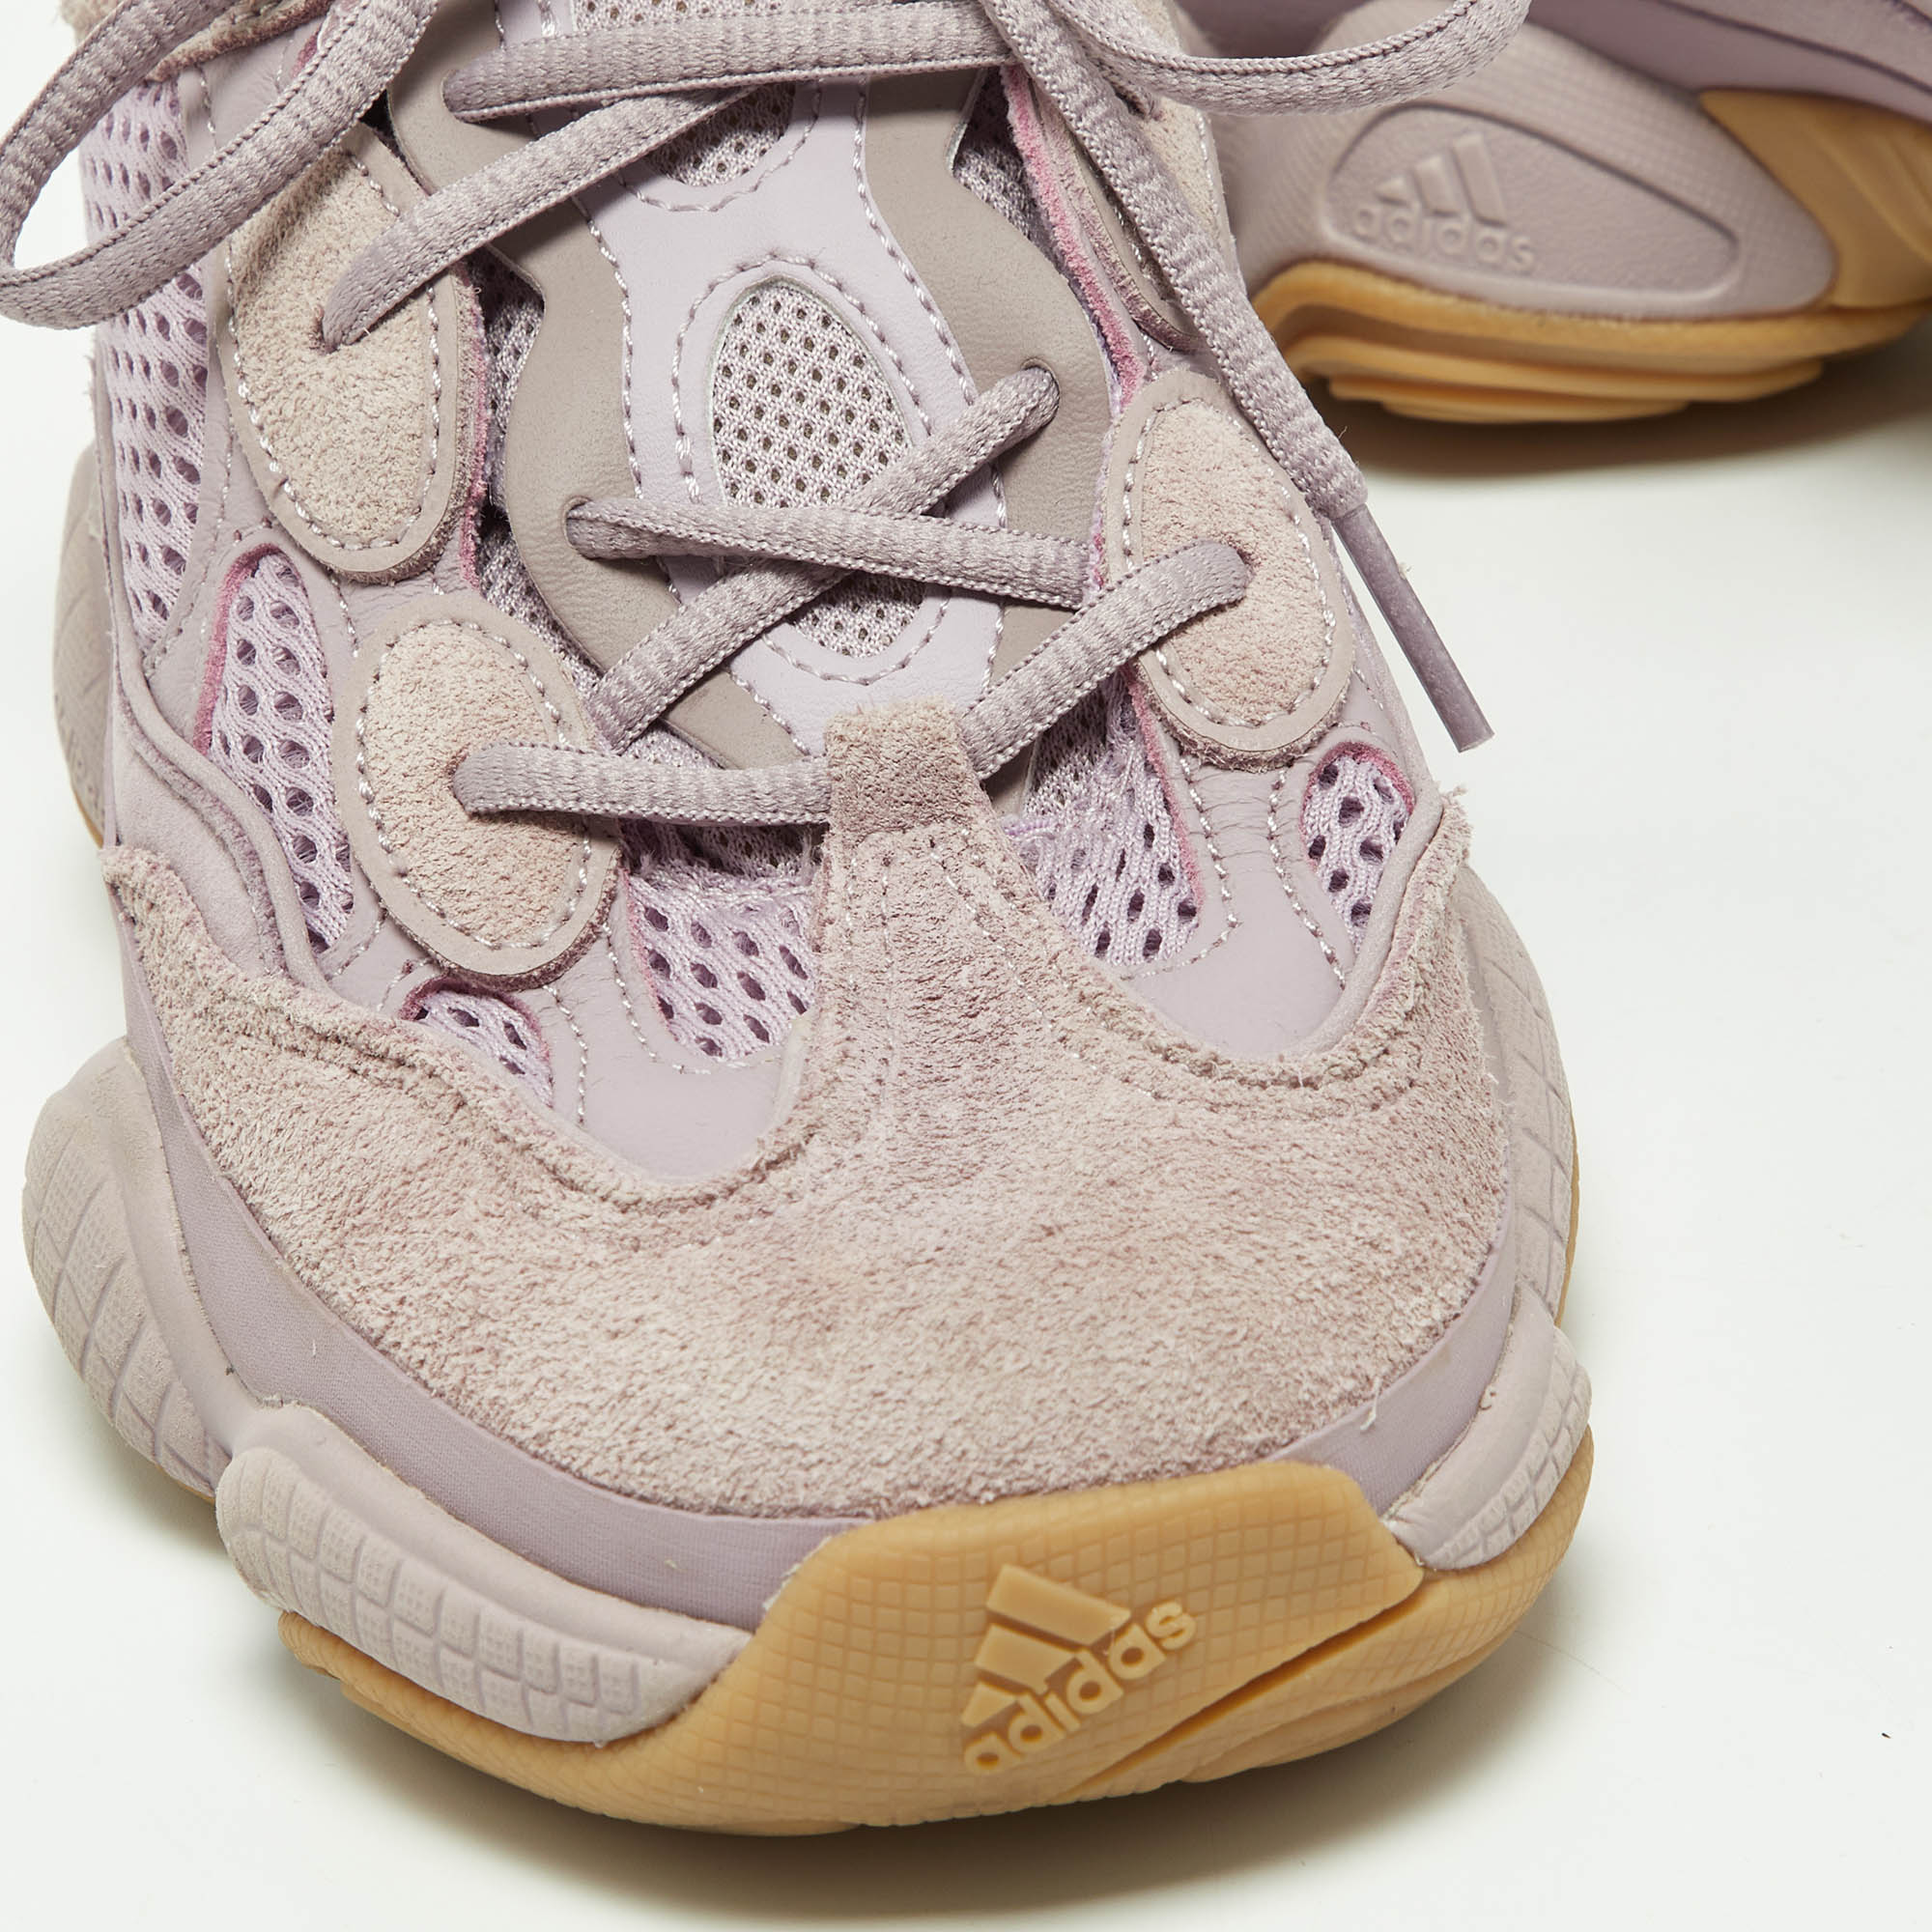 Yeezy X Adidas Purple Suede And Mesh Yeezy 500 Soft Vision Sneakers Size 38